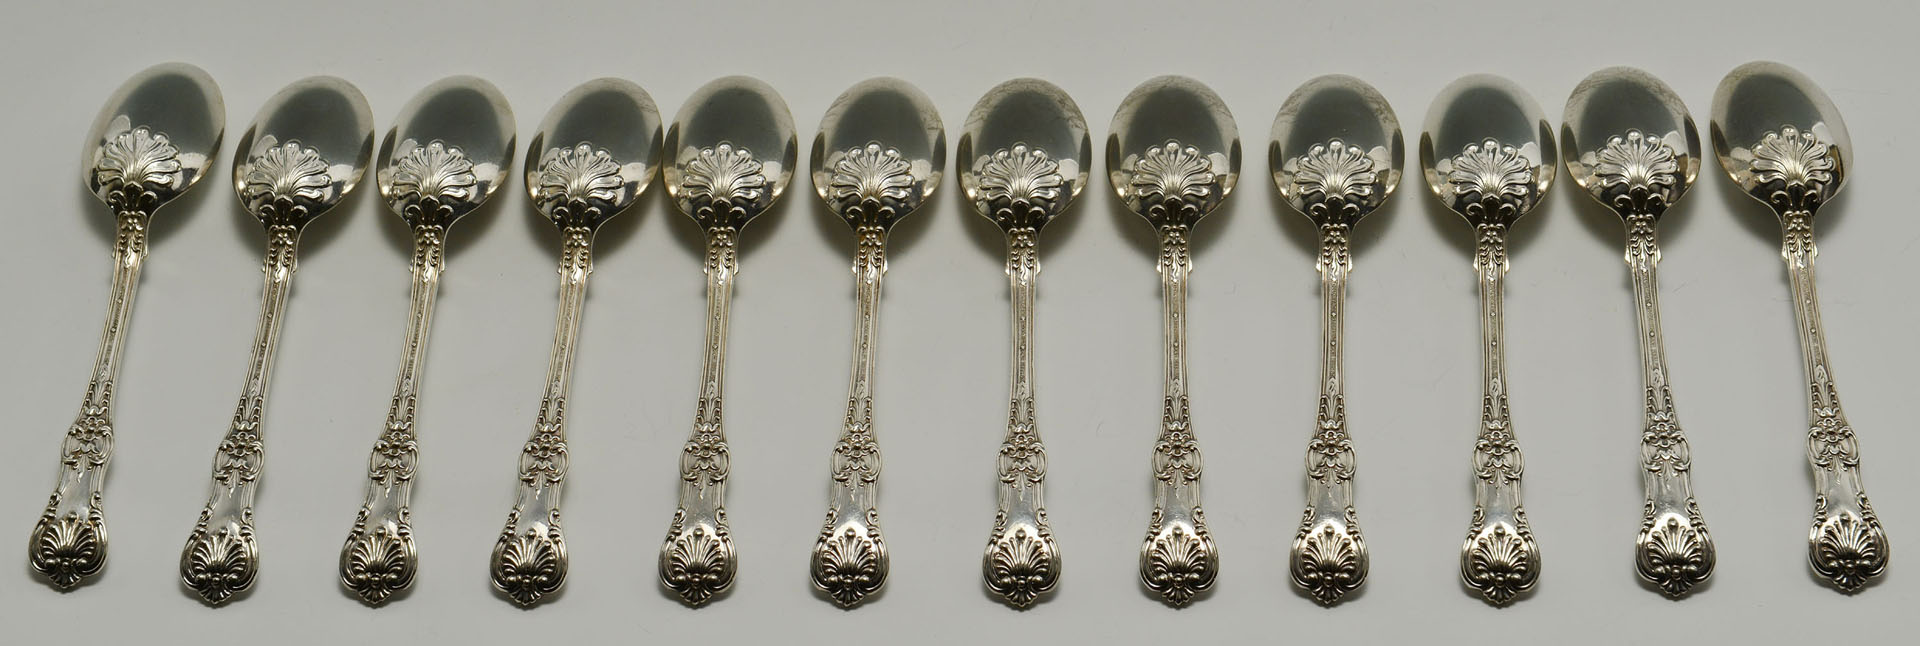 Lot 109: 12 Tiffany English King Sterling Spoons, cased